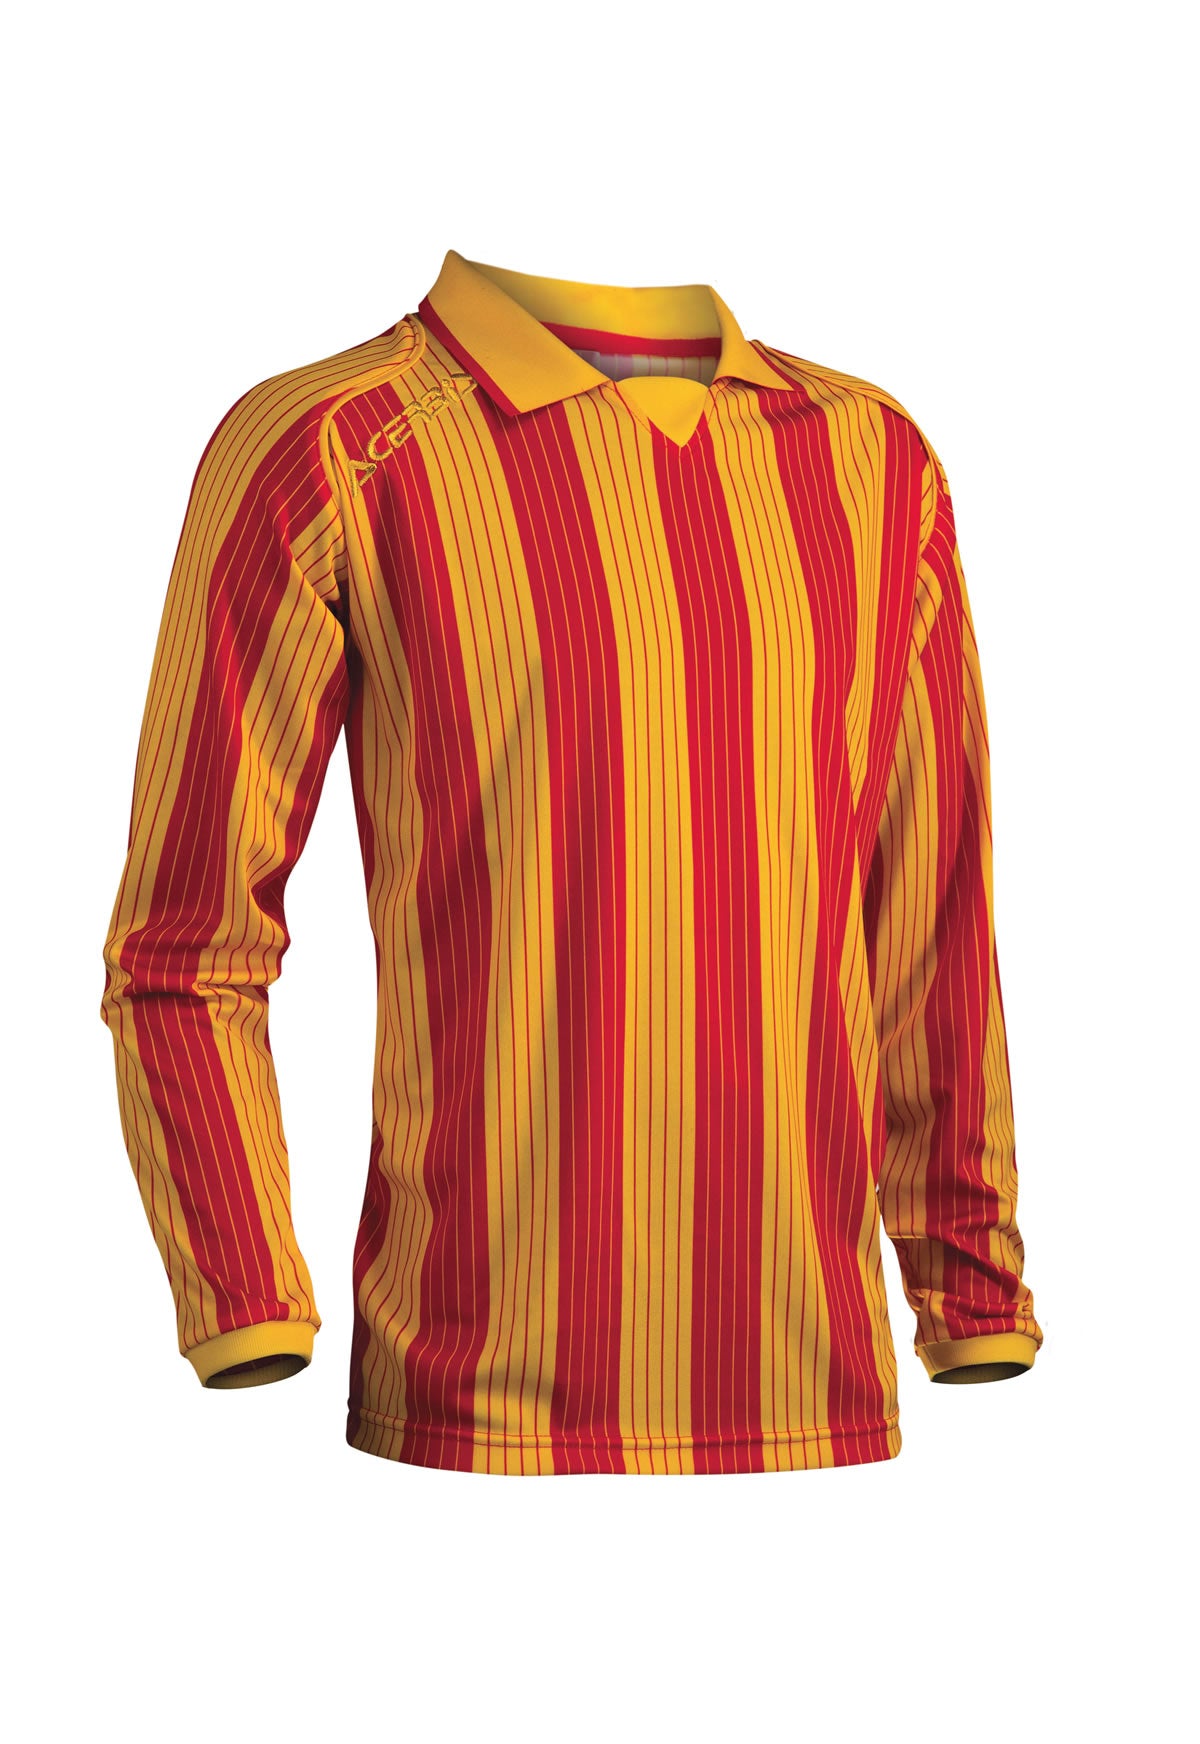 JERSEY VERTICAL LS - YELLOW/RED